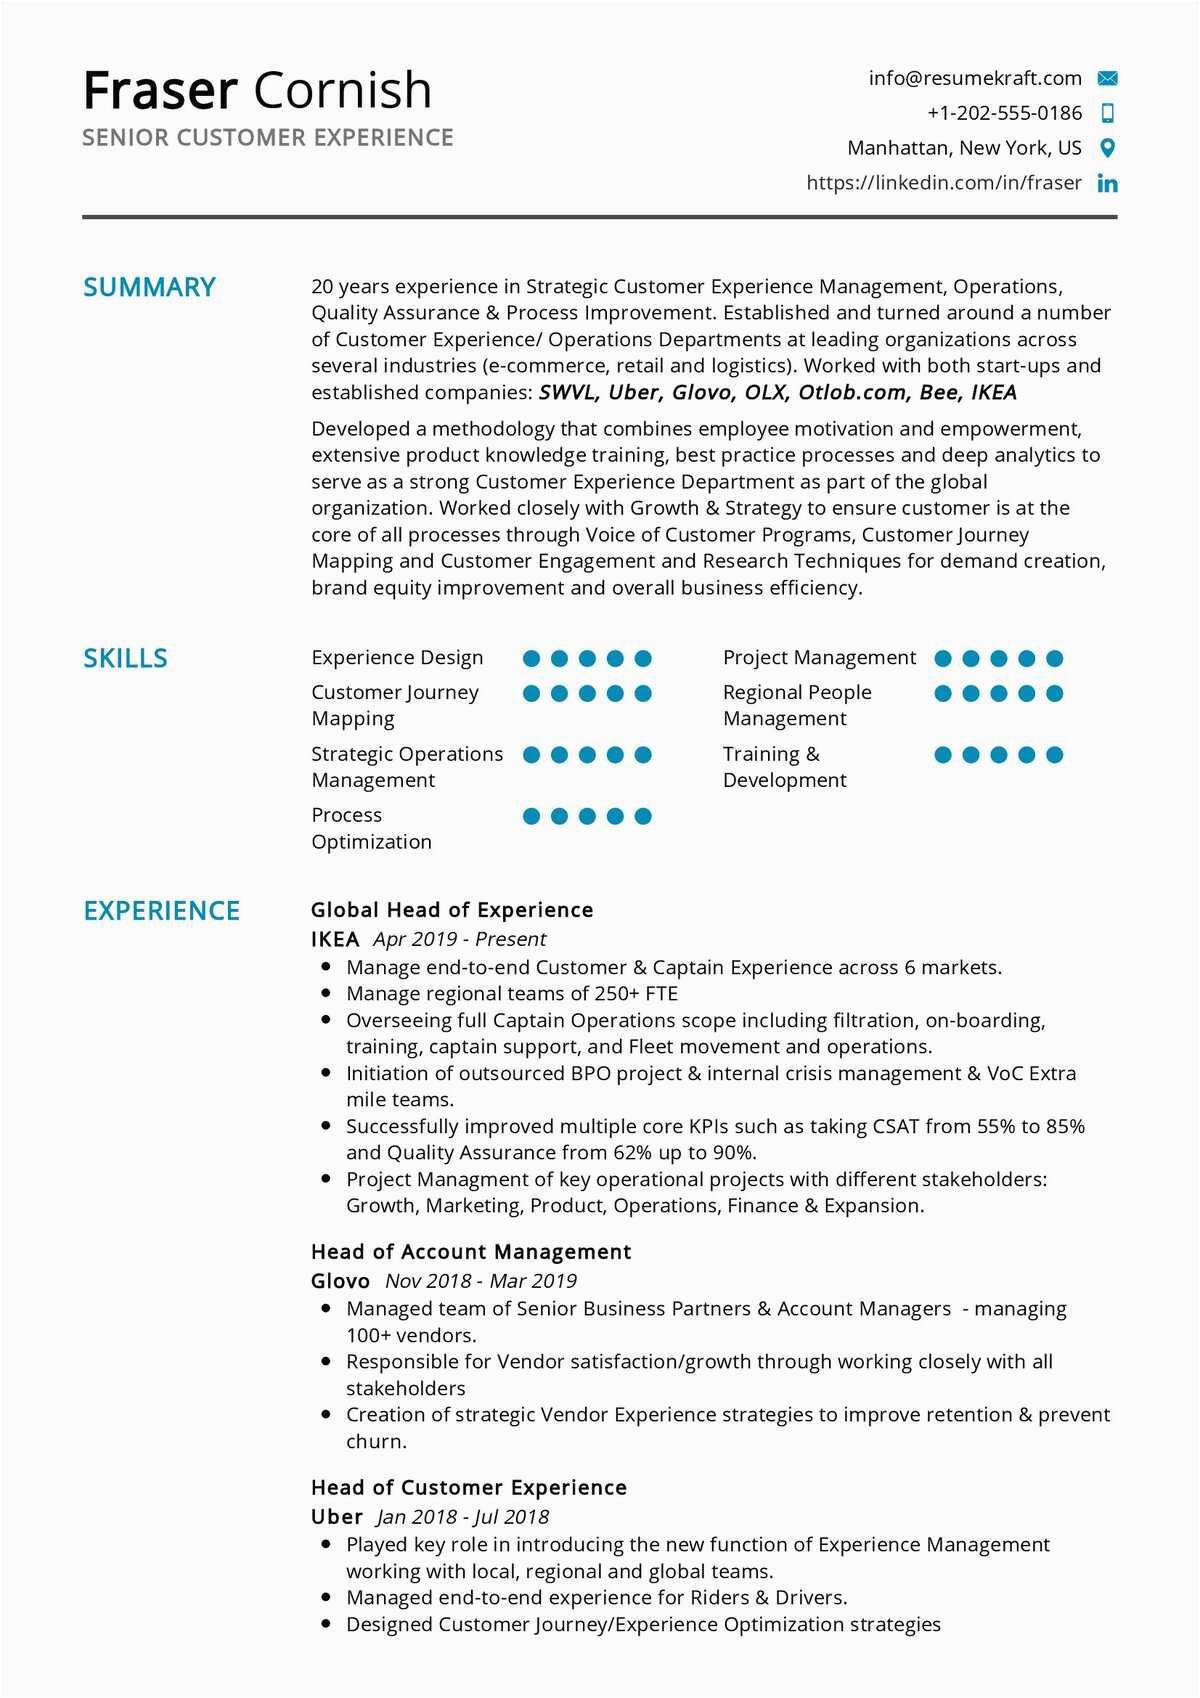 Best Resume Templates for Experienced It Professionals Senior Customer Experience Resume Sample 2021